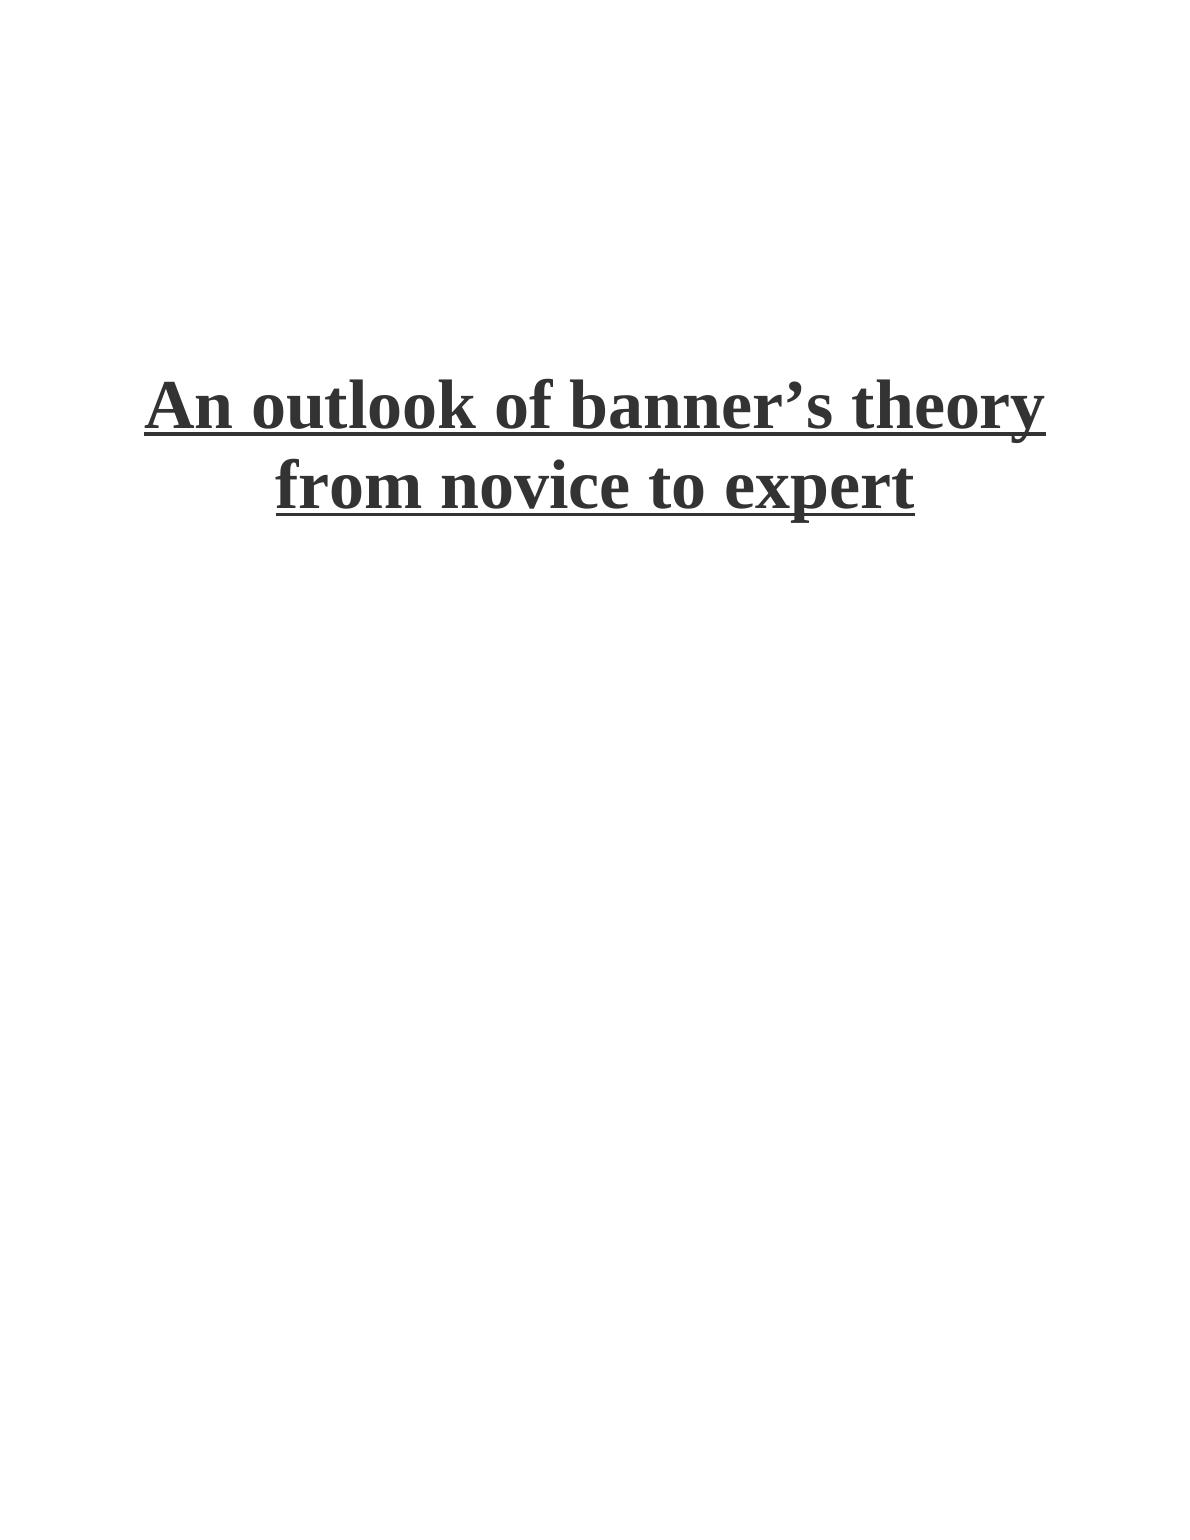 An Outlook of Banner's Theory: From Novice to Expert_1